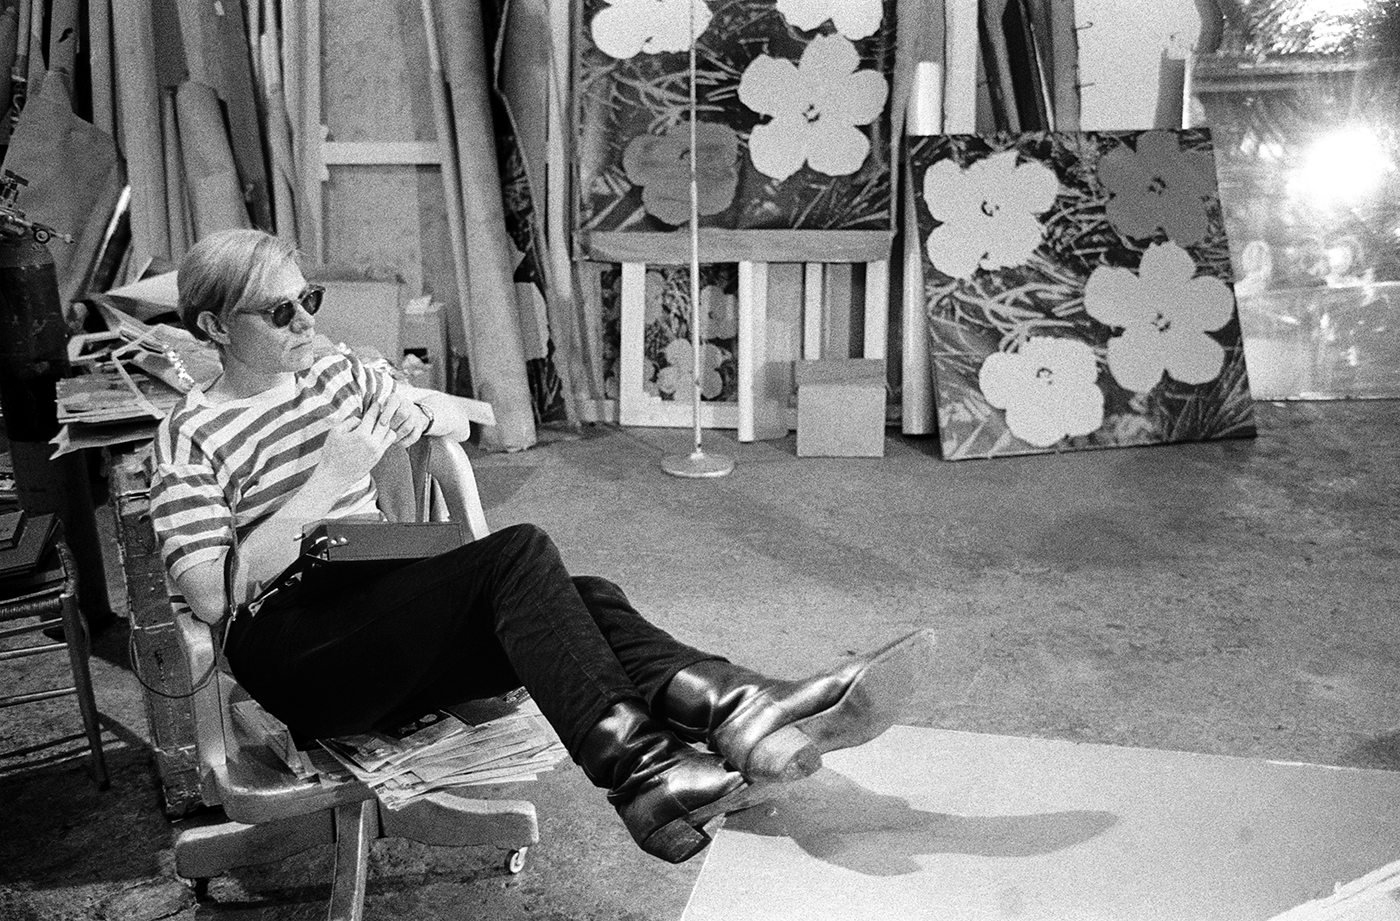 Shore’s important photos capture Warhol hard at work on his art, but also a...